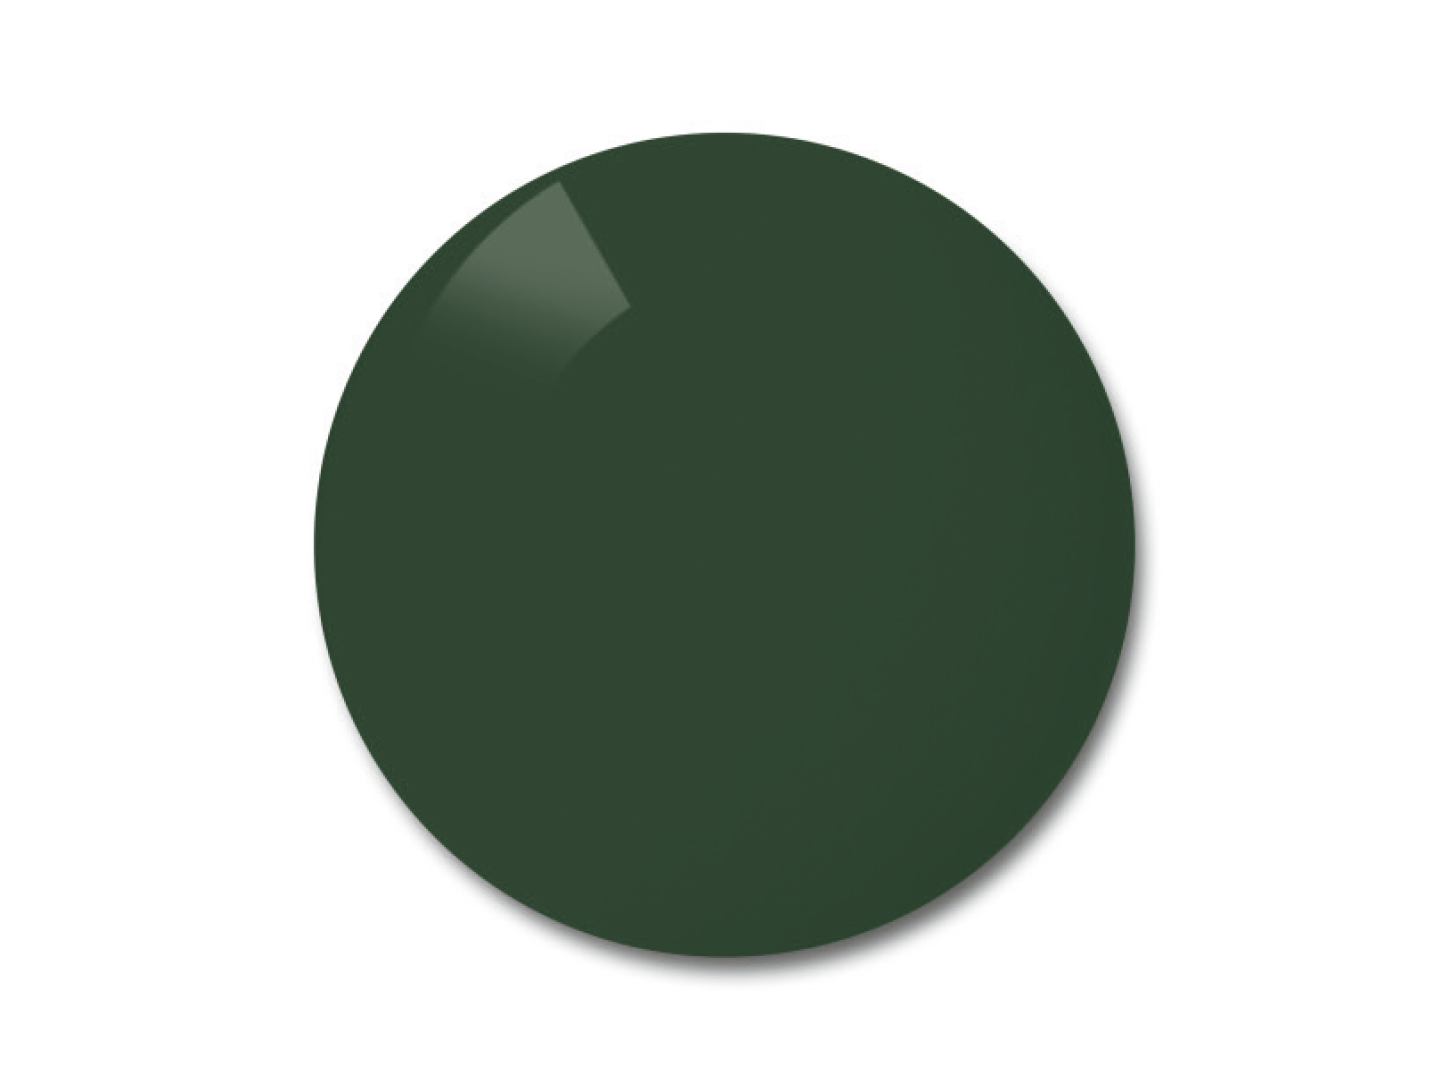 Color example for the pioneer (grey-green) polarized lenses.